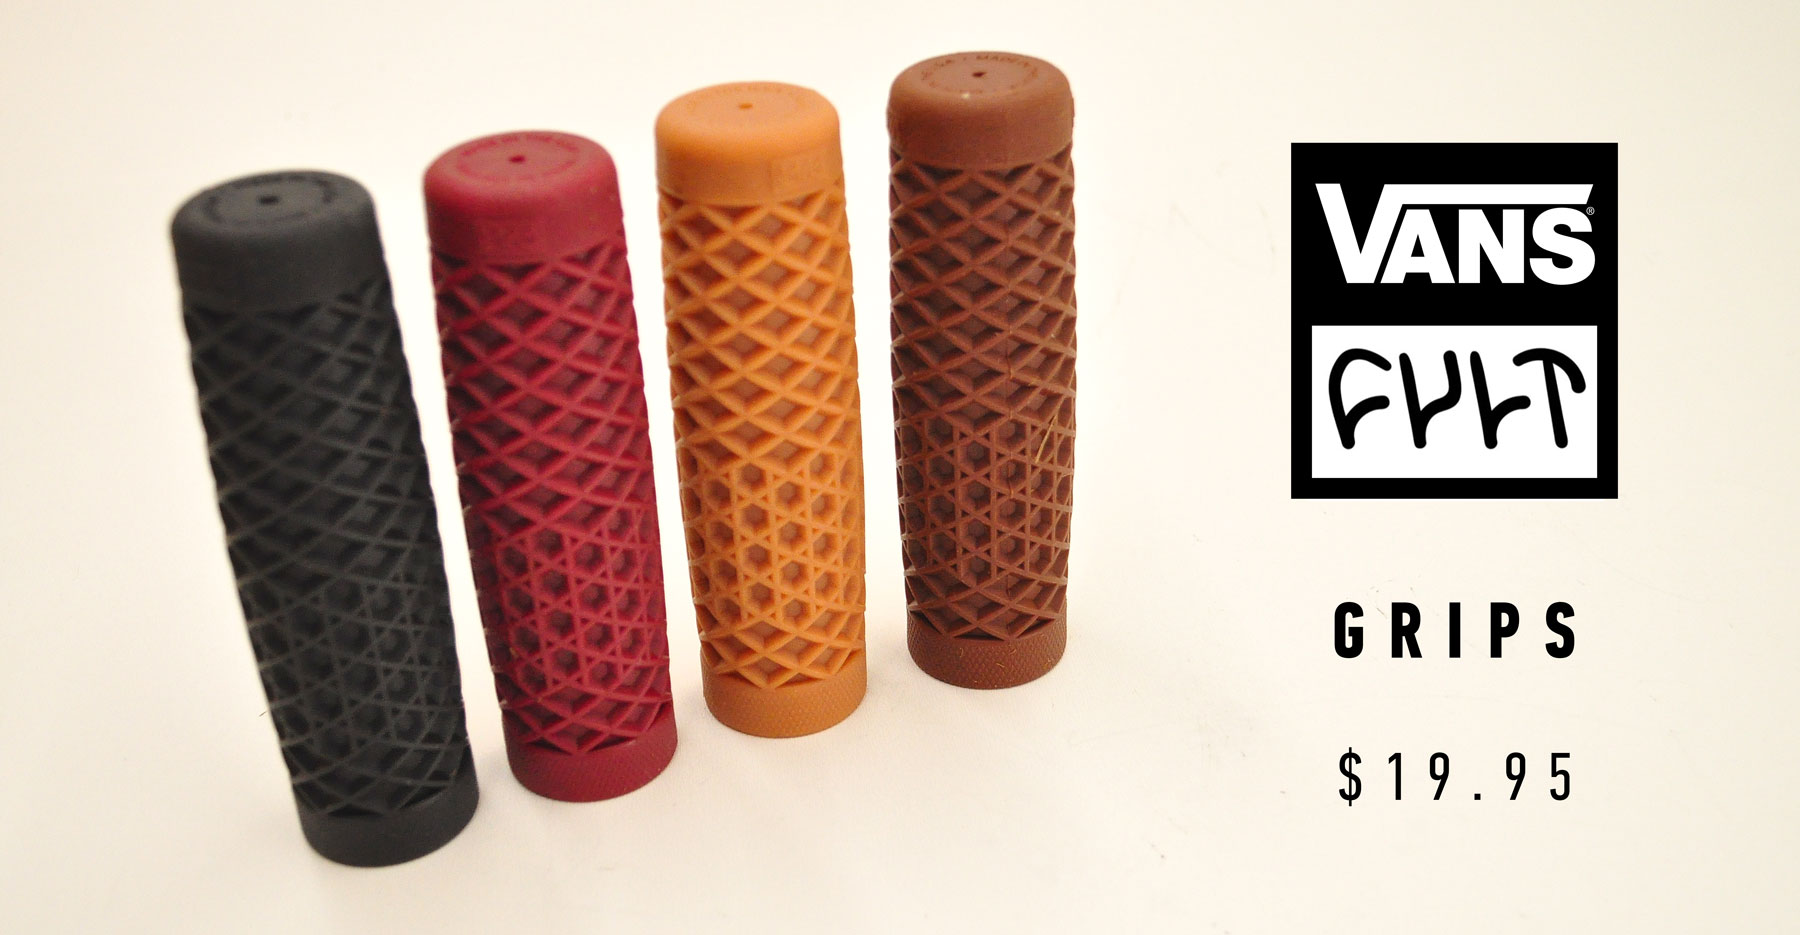 Order your Vans Rubber Motorcycle Grips today